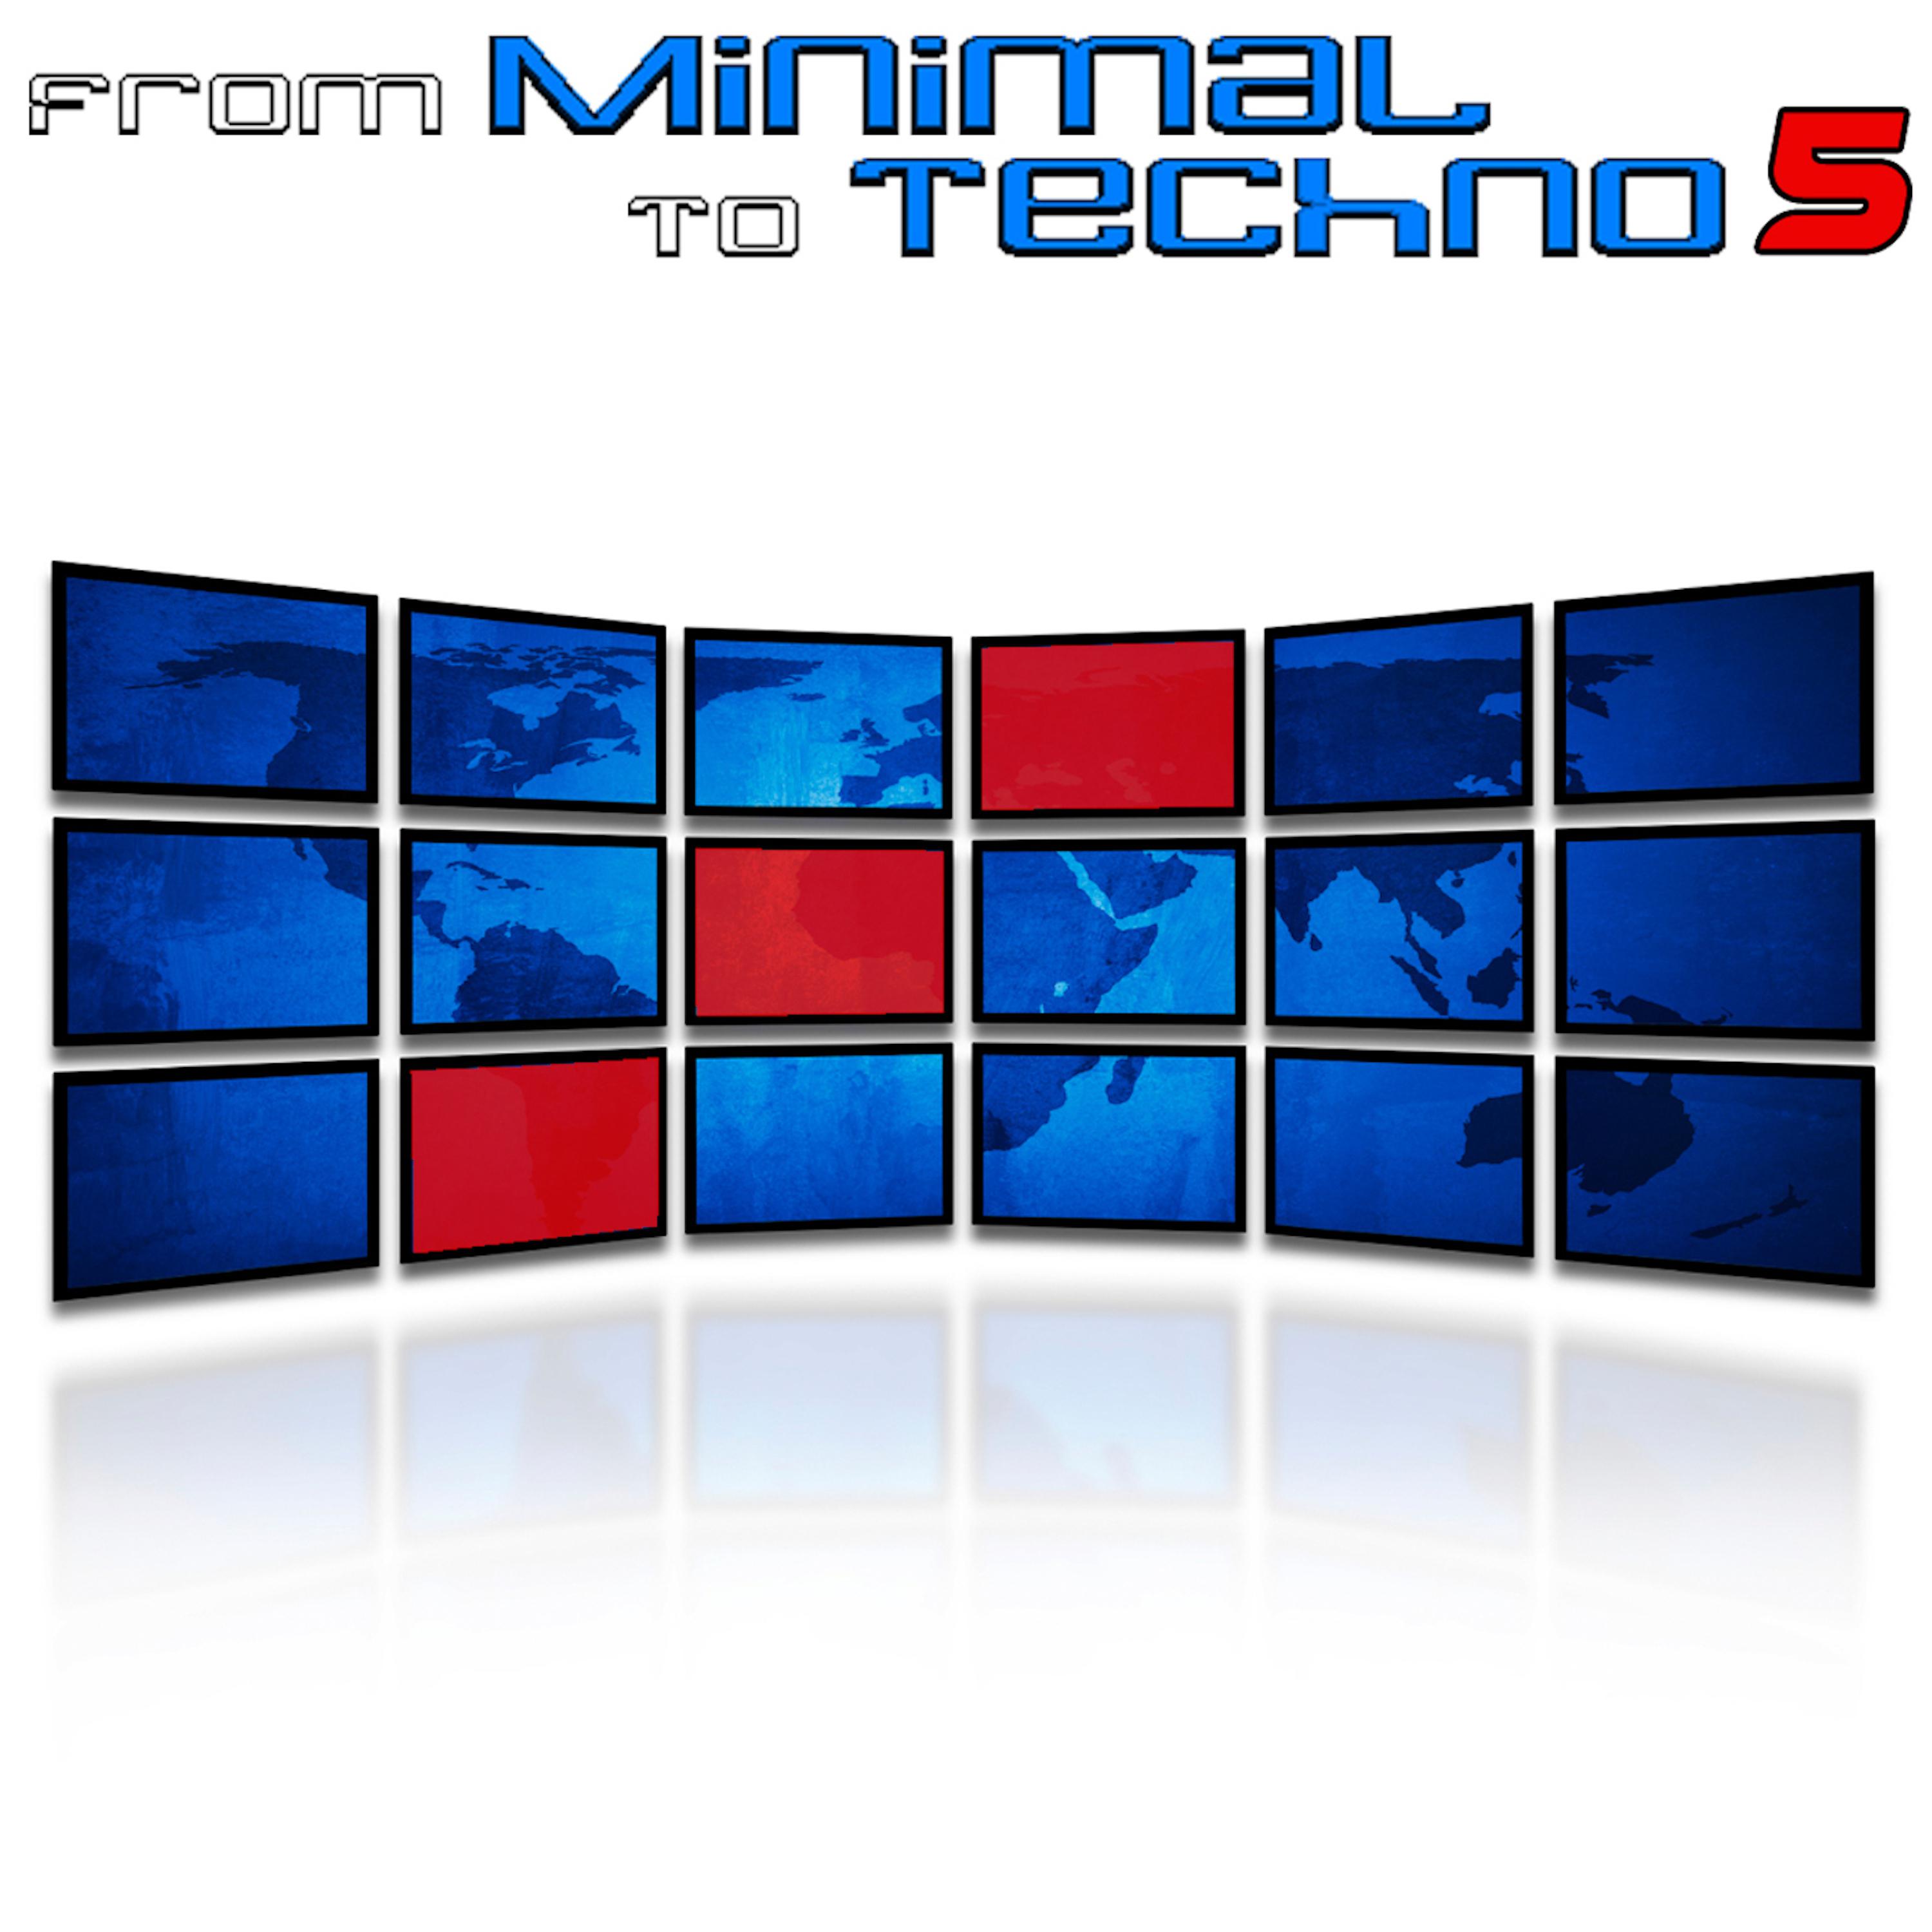 From Minimal to Techno Vol. 5